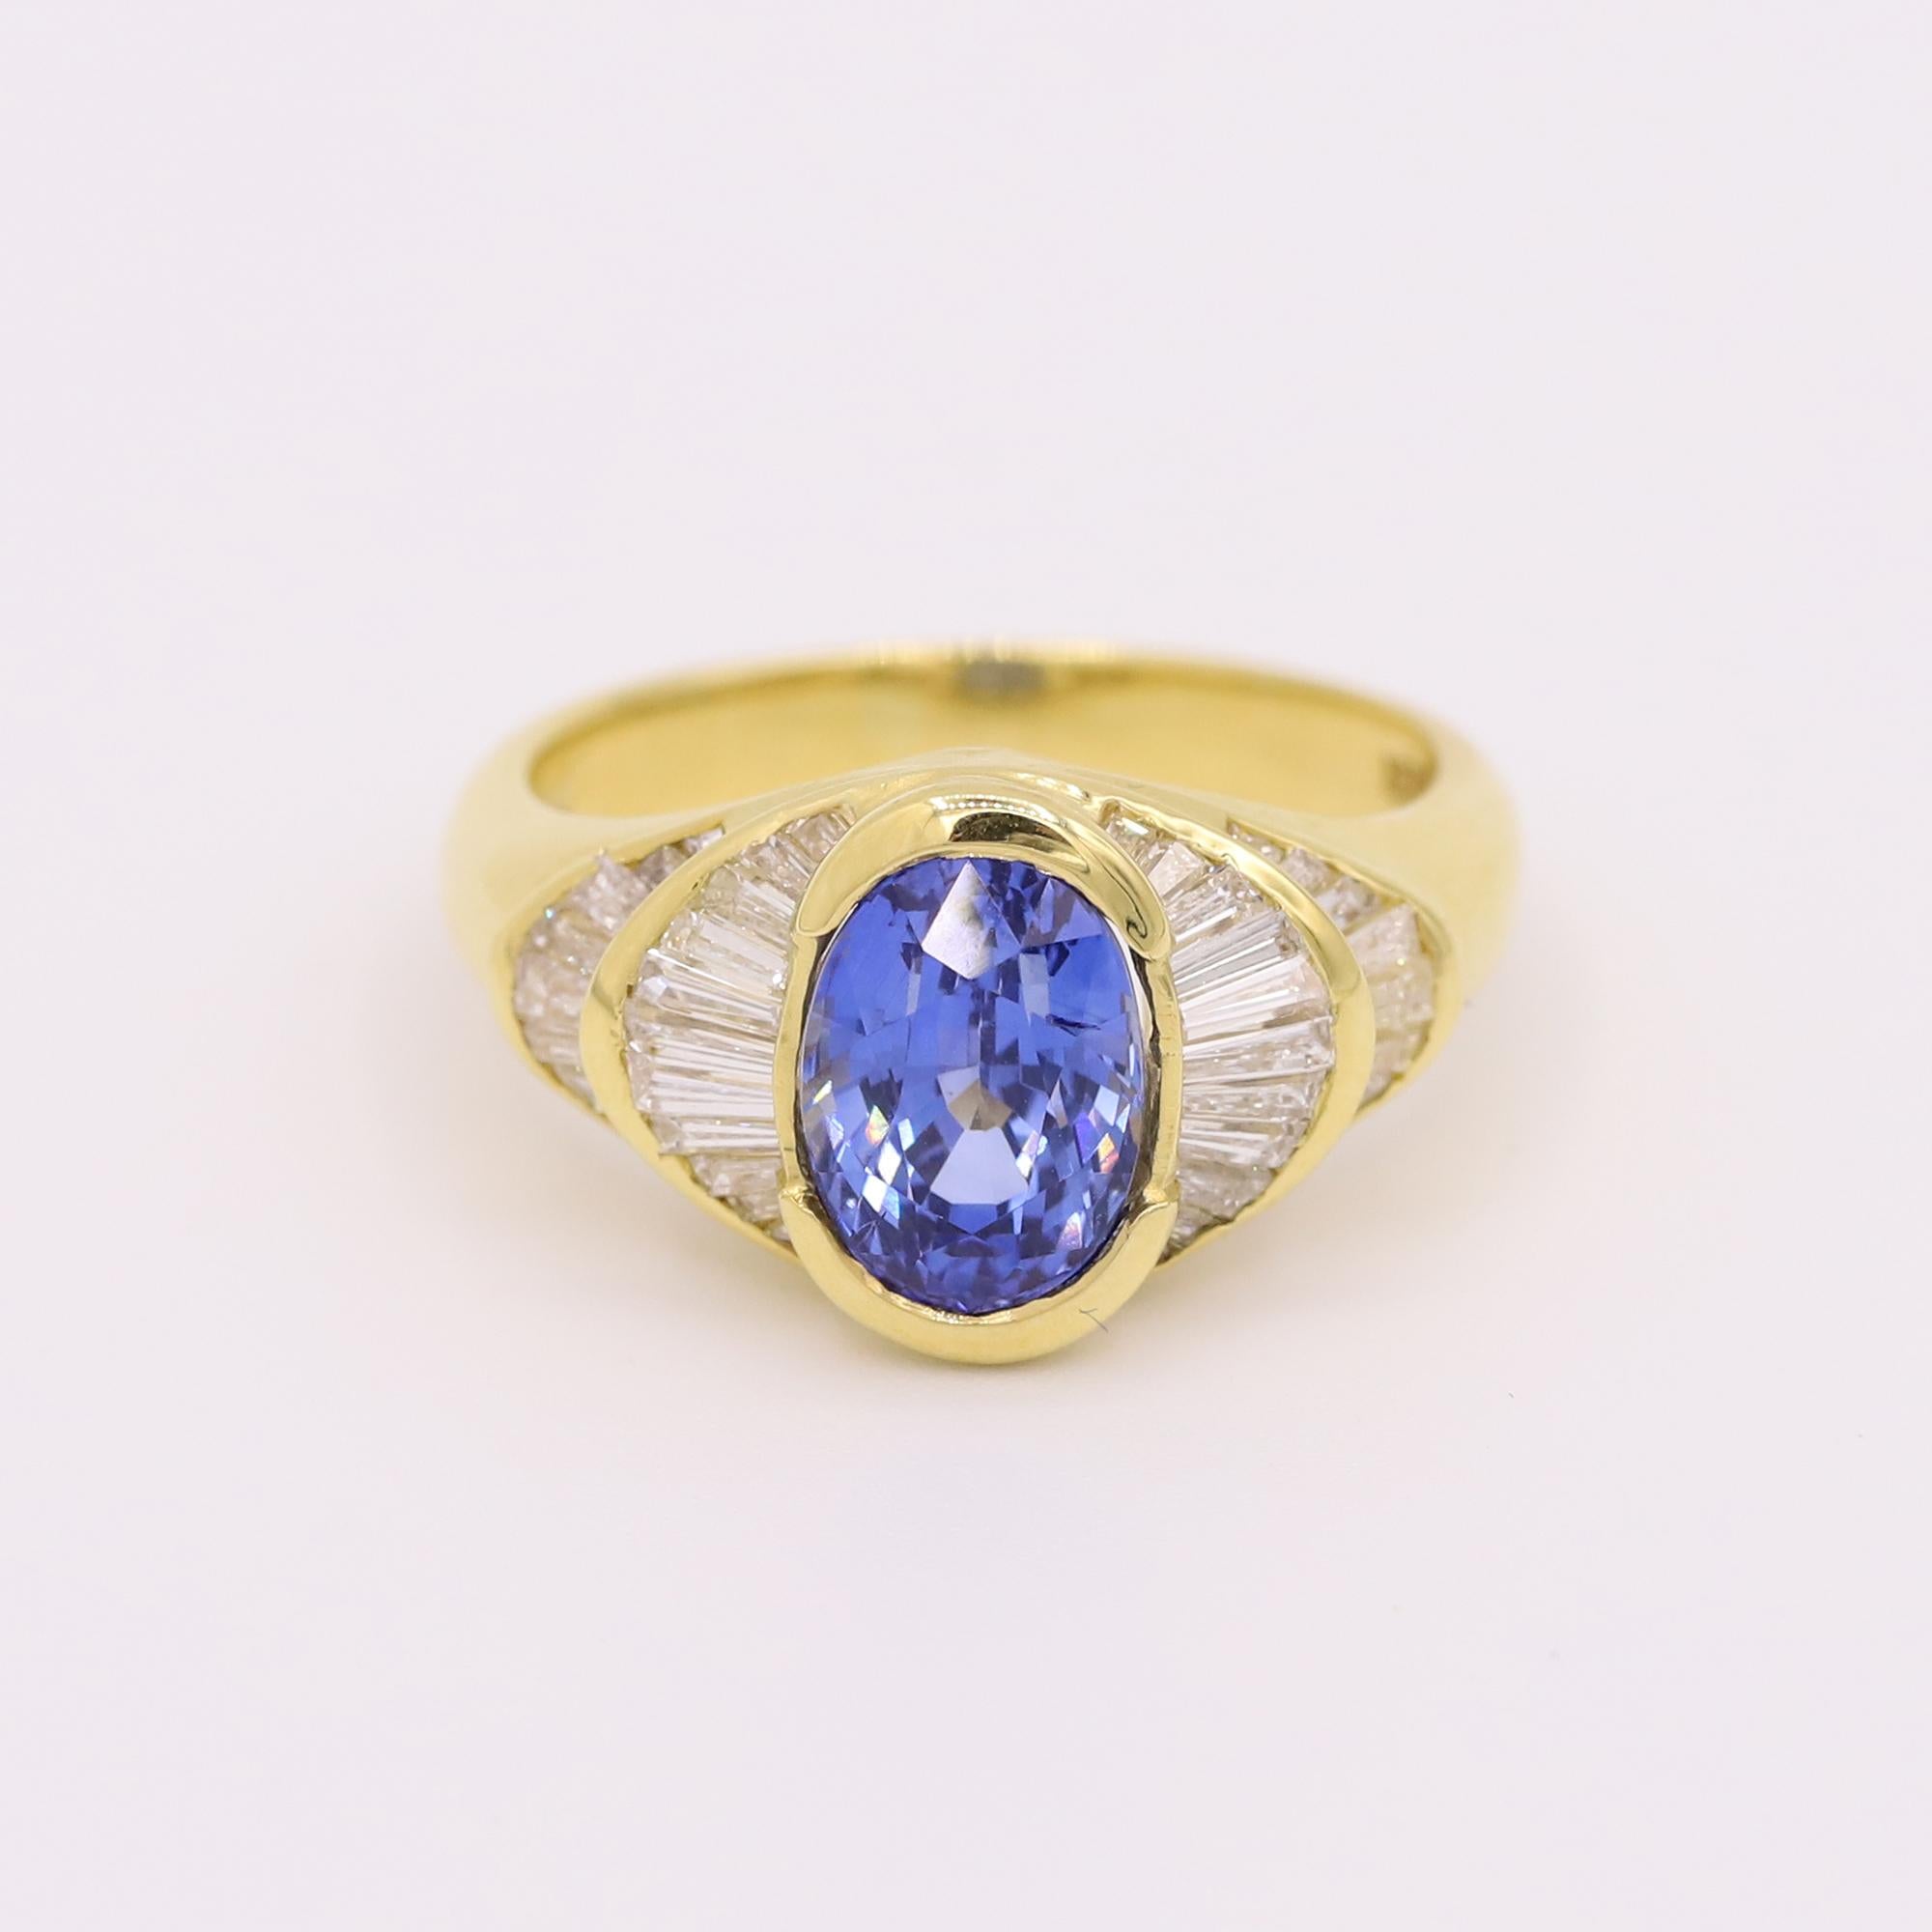 Vintage 18k yellow gold sapphire and diamond ring. The oval sapphire weighs 3.03 ctw. The ring features 40 tapered baguettes weighing 1.10 ctw. The ring size is 6.5 
